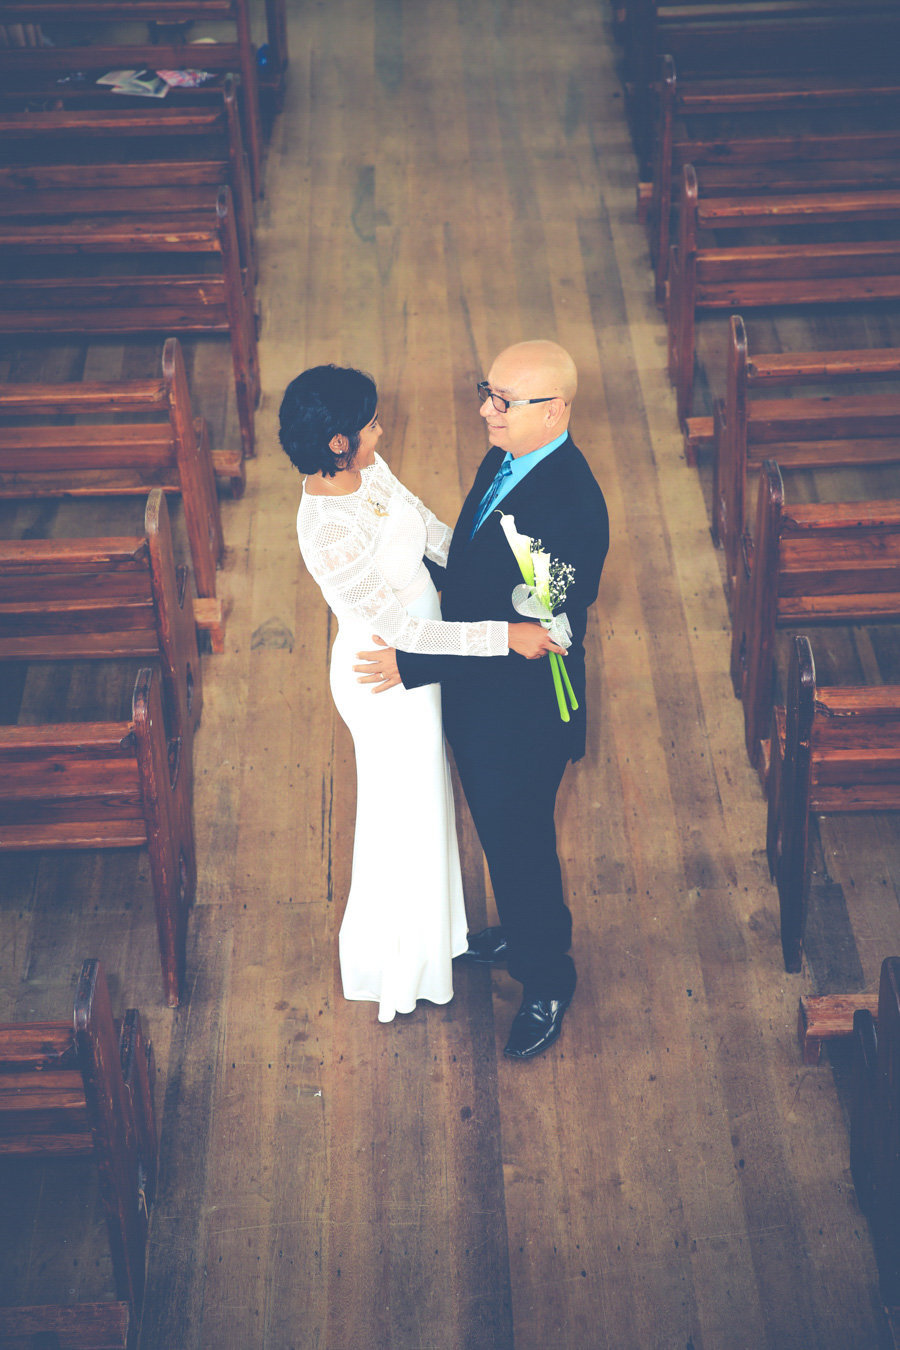 Bride and father-of-the-bride share a moment in church aisle. Photo by Ross Photography, Trinidad, W.I..